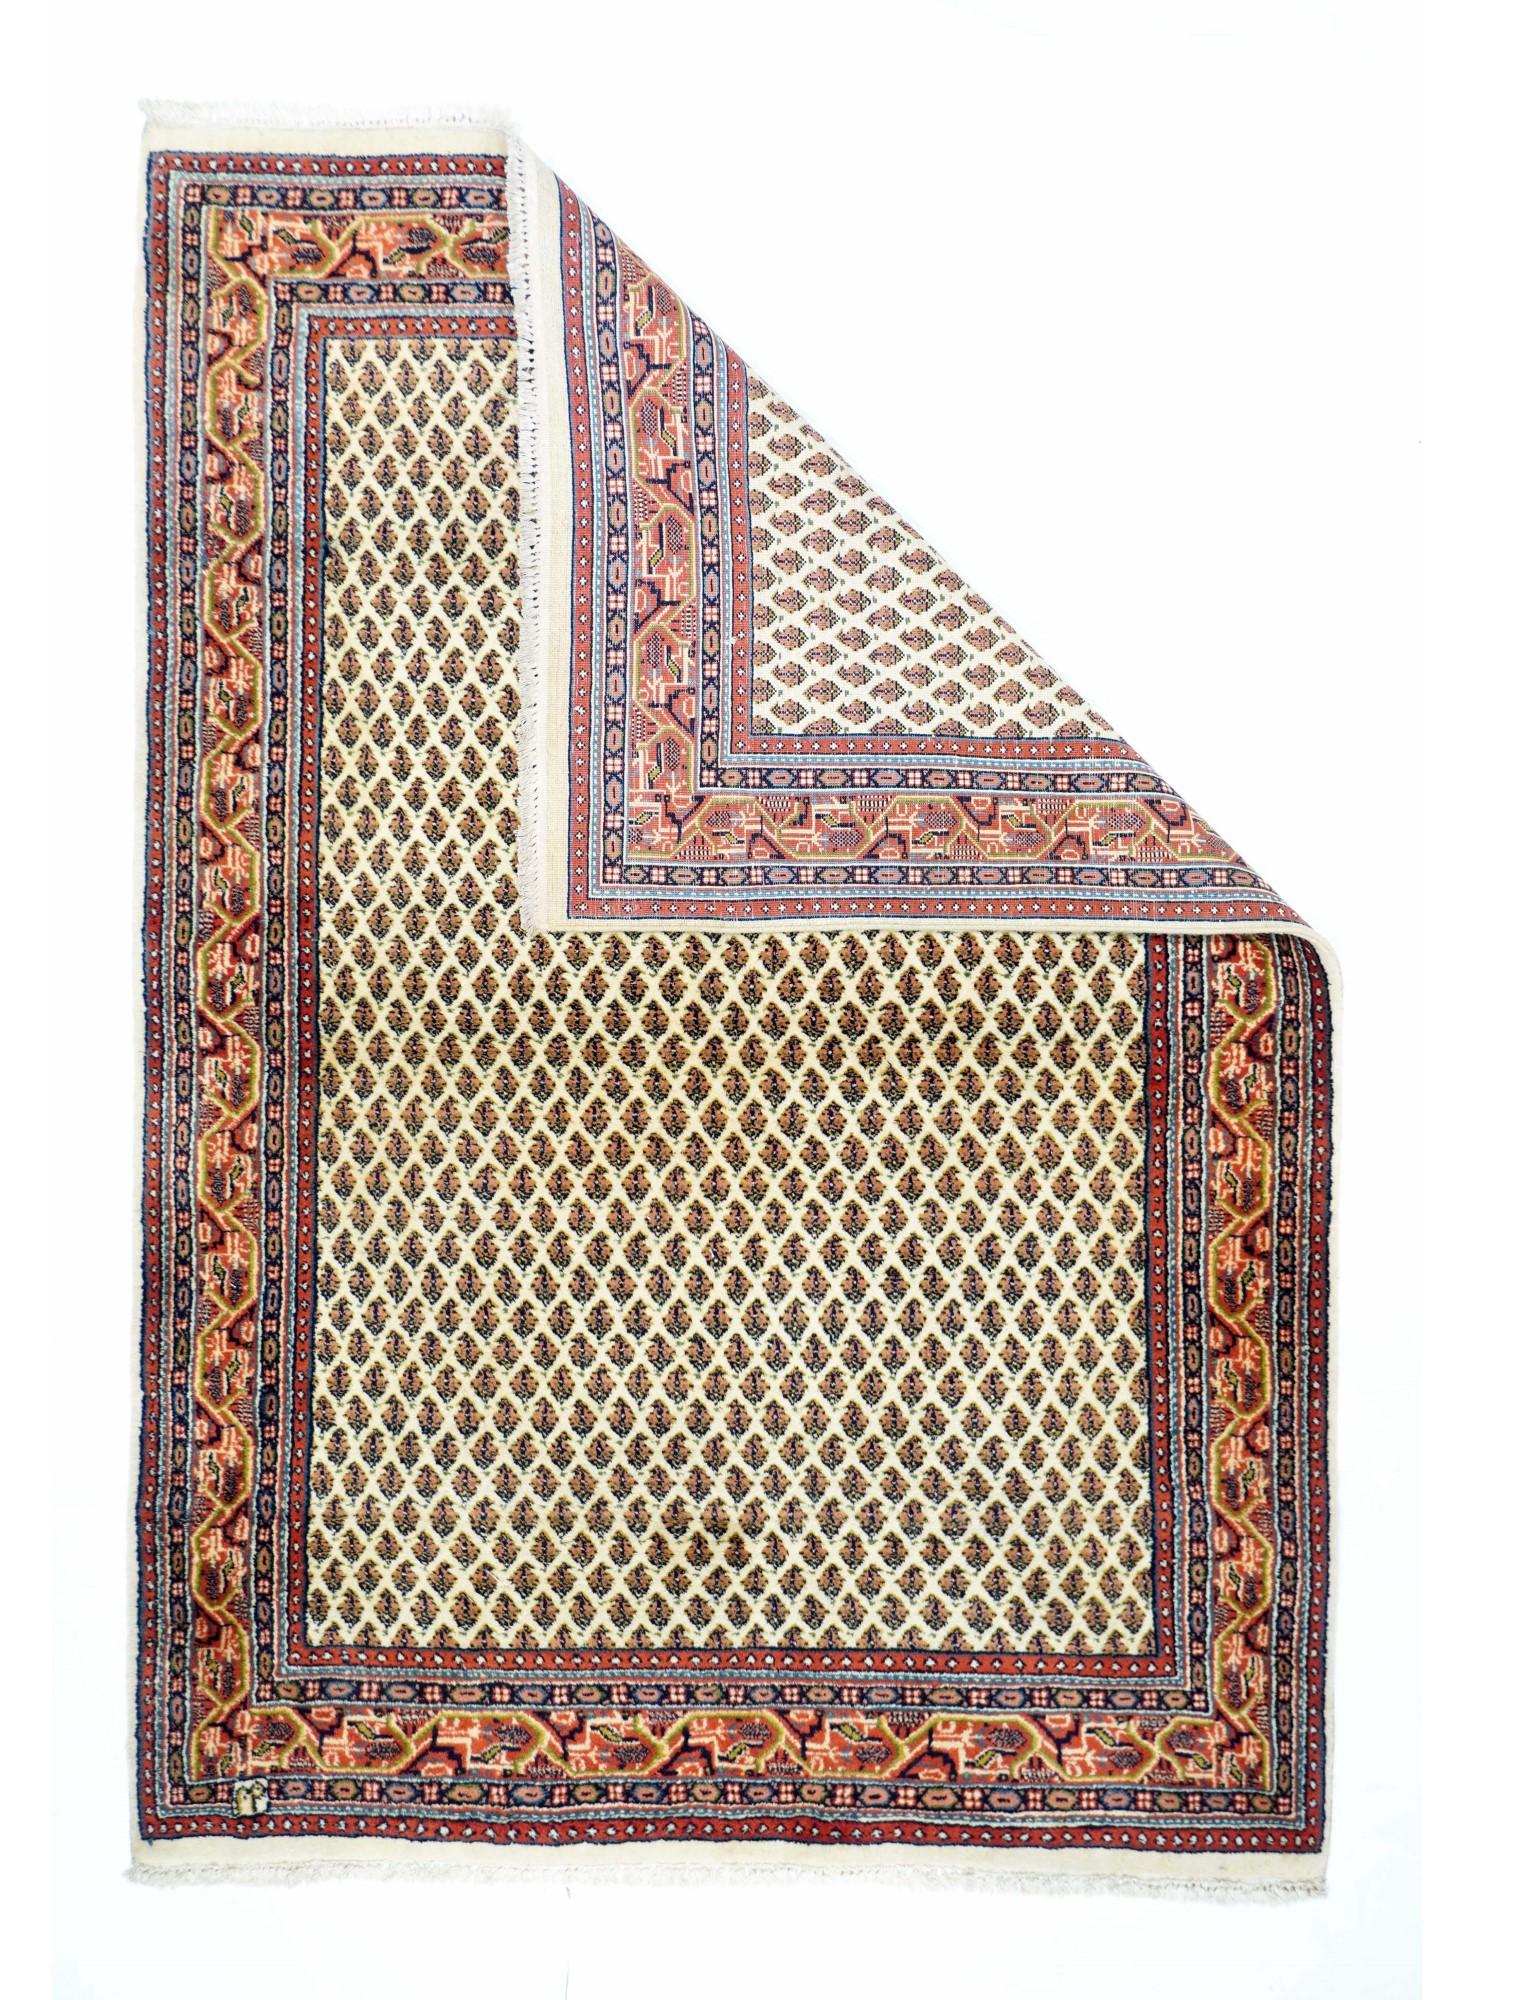 Vintage Persian Mir Rug 3'10'' x 5'10''. The cream field of this well-woven interpretation of the classic Saraband design, shows literally hundreds of row reversing small floriated botehs set in an offset, half-drop layout. Angular 